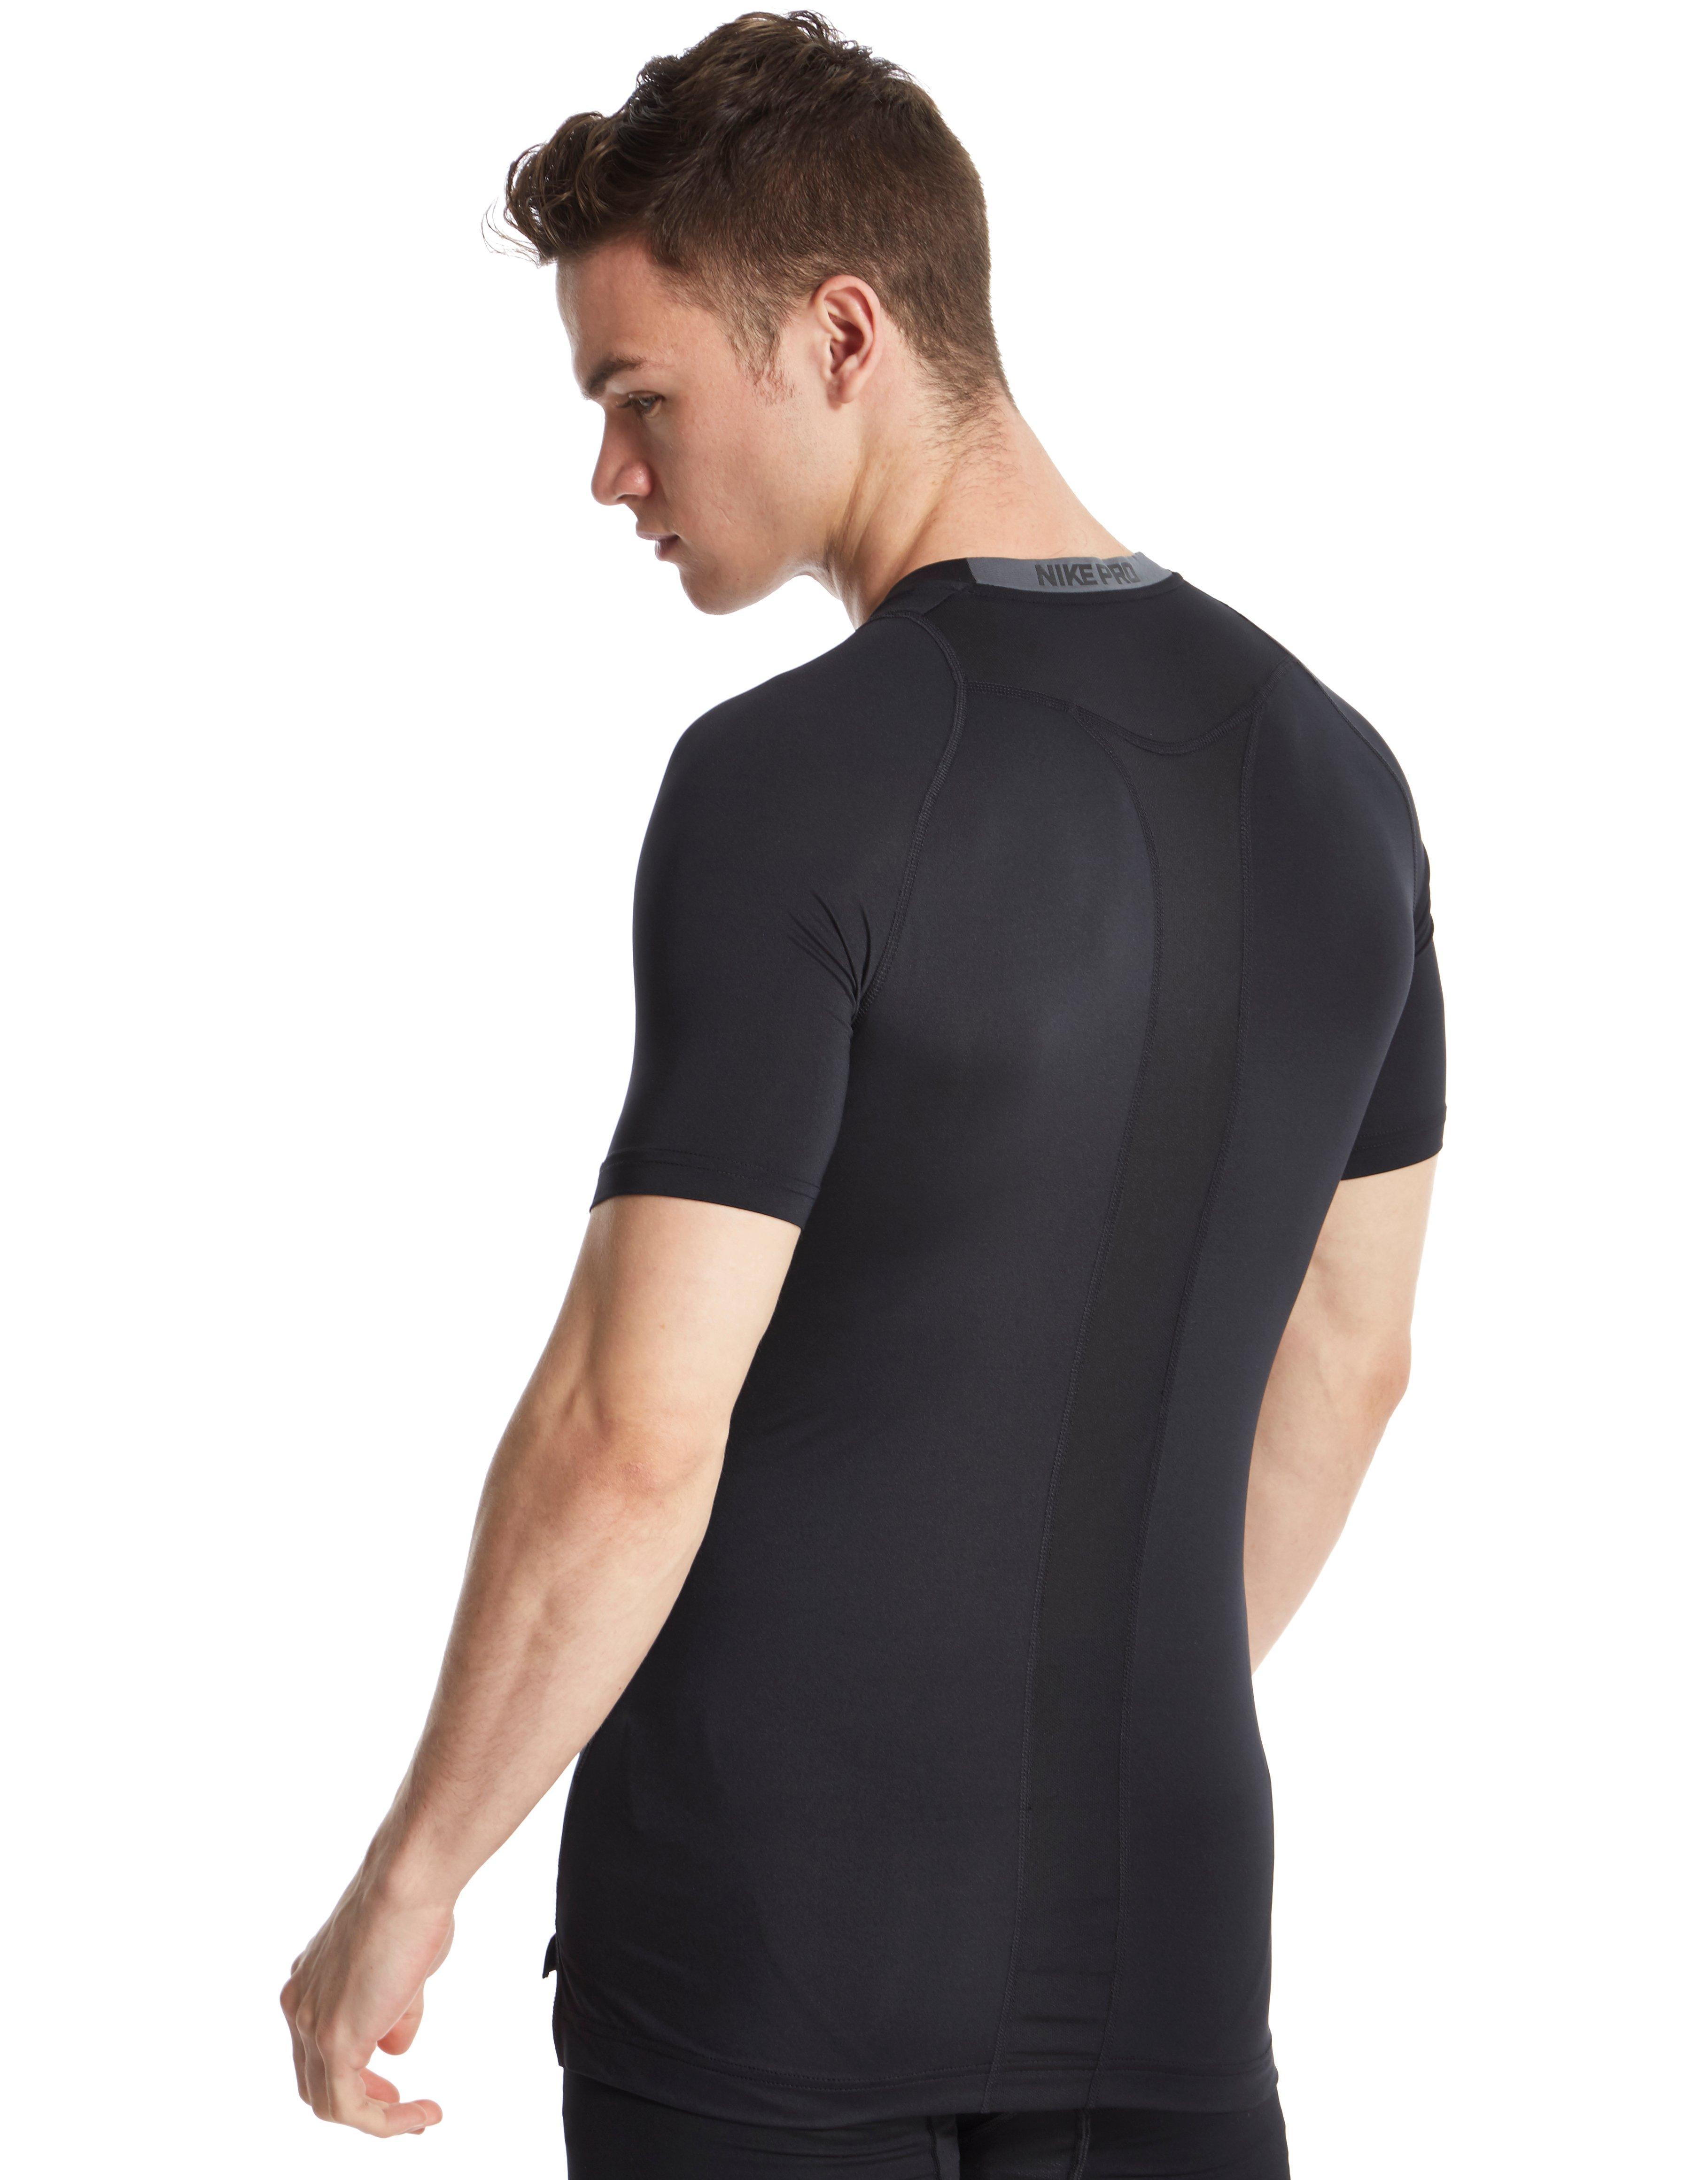 Nike Synthetic Pro Cool Compression T-shirt in Black for Men - Lyst